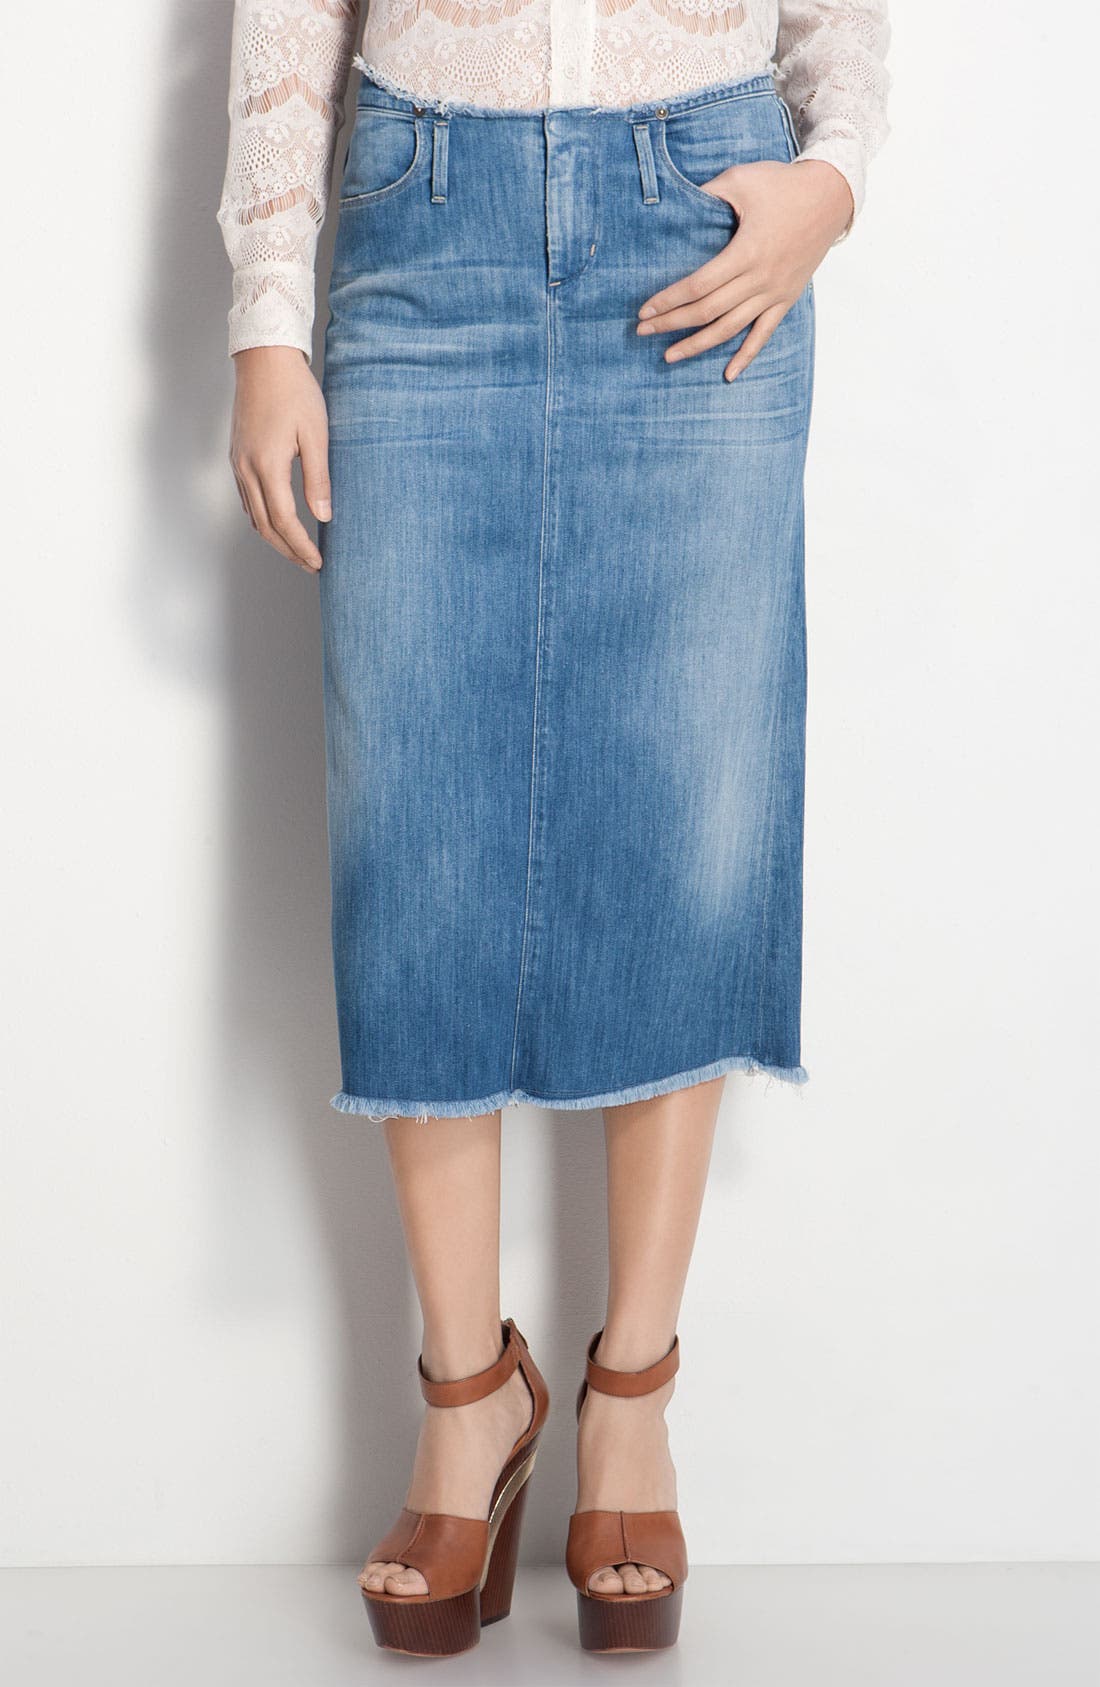 citizens of humanity skirt